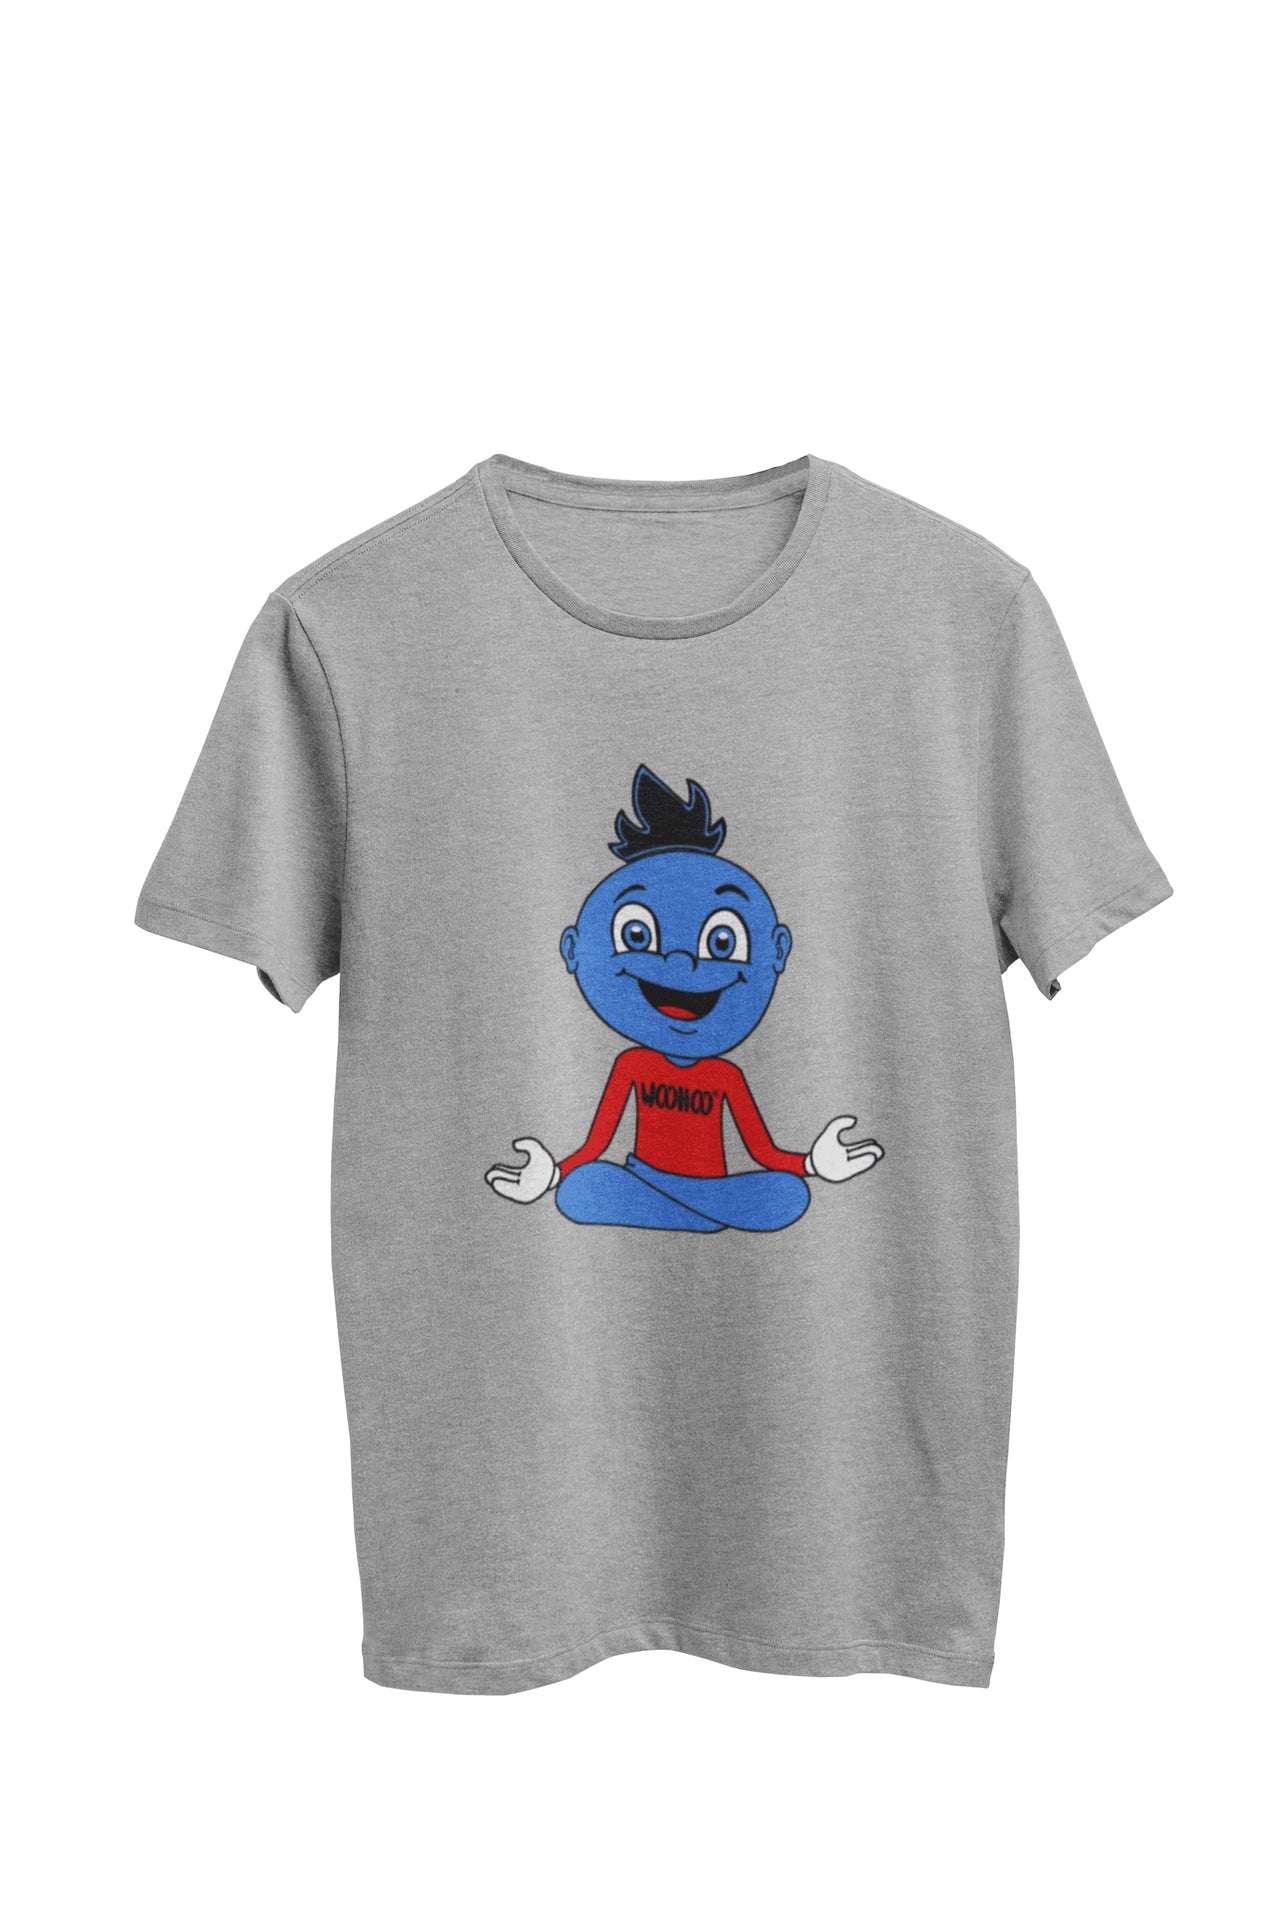 WooHooBerry seated in a crossed-legged yoga pose, exuding tranquility and balance, while wearing a red T-shirt that proudly displays 'WooHoo.' The gray T-shirt captures the serene yet vibrant atmosphere of the moment.